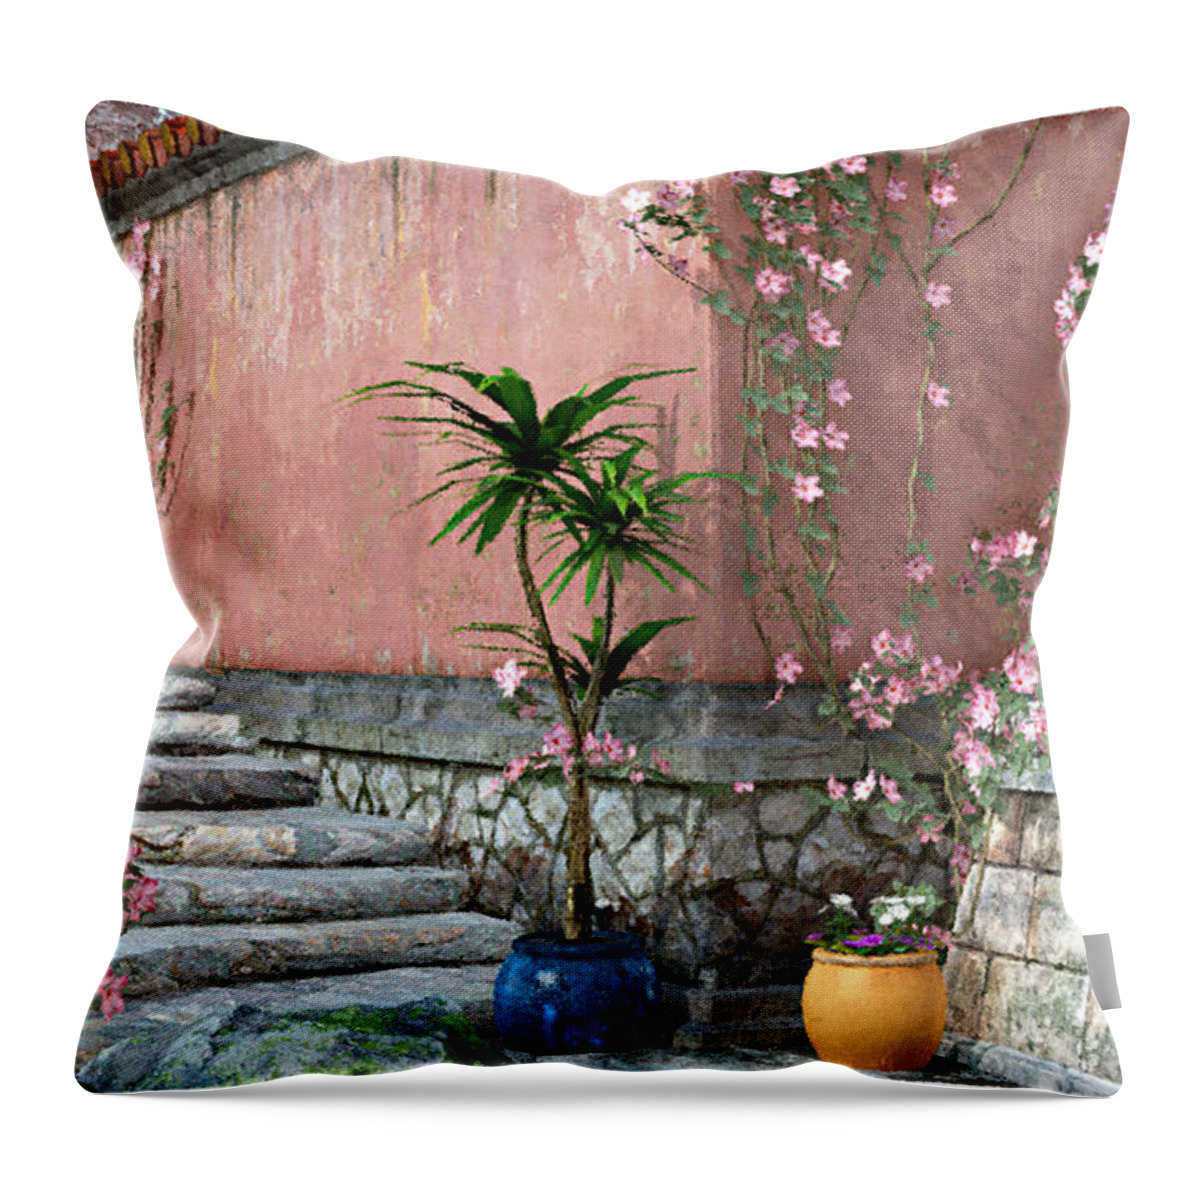 Steps Throw Pillow featuring the painting Back Steps by Peter J Sucy